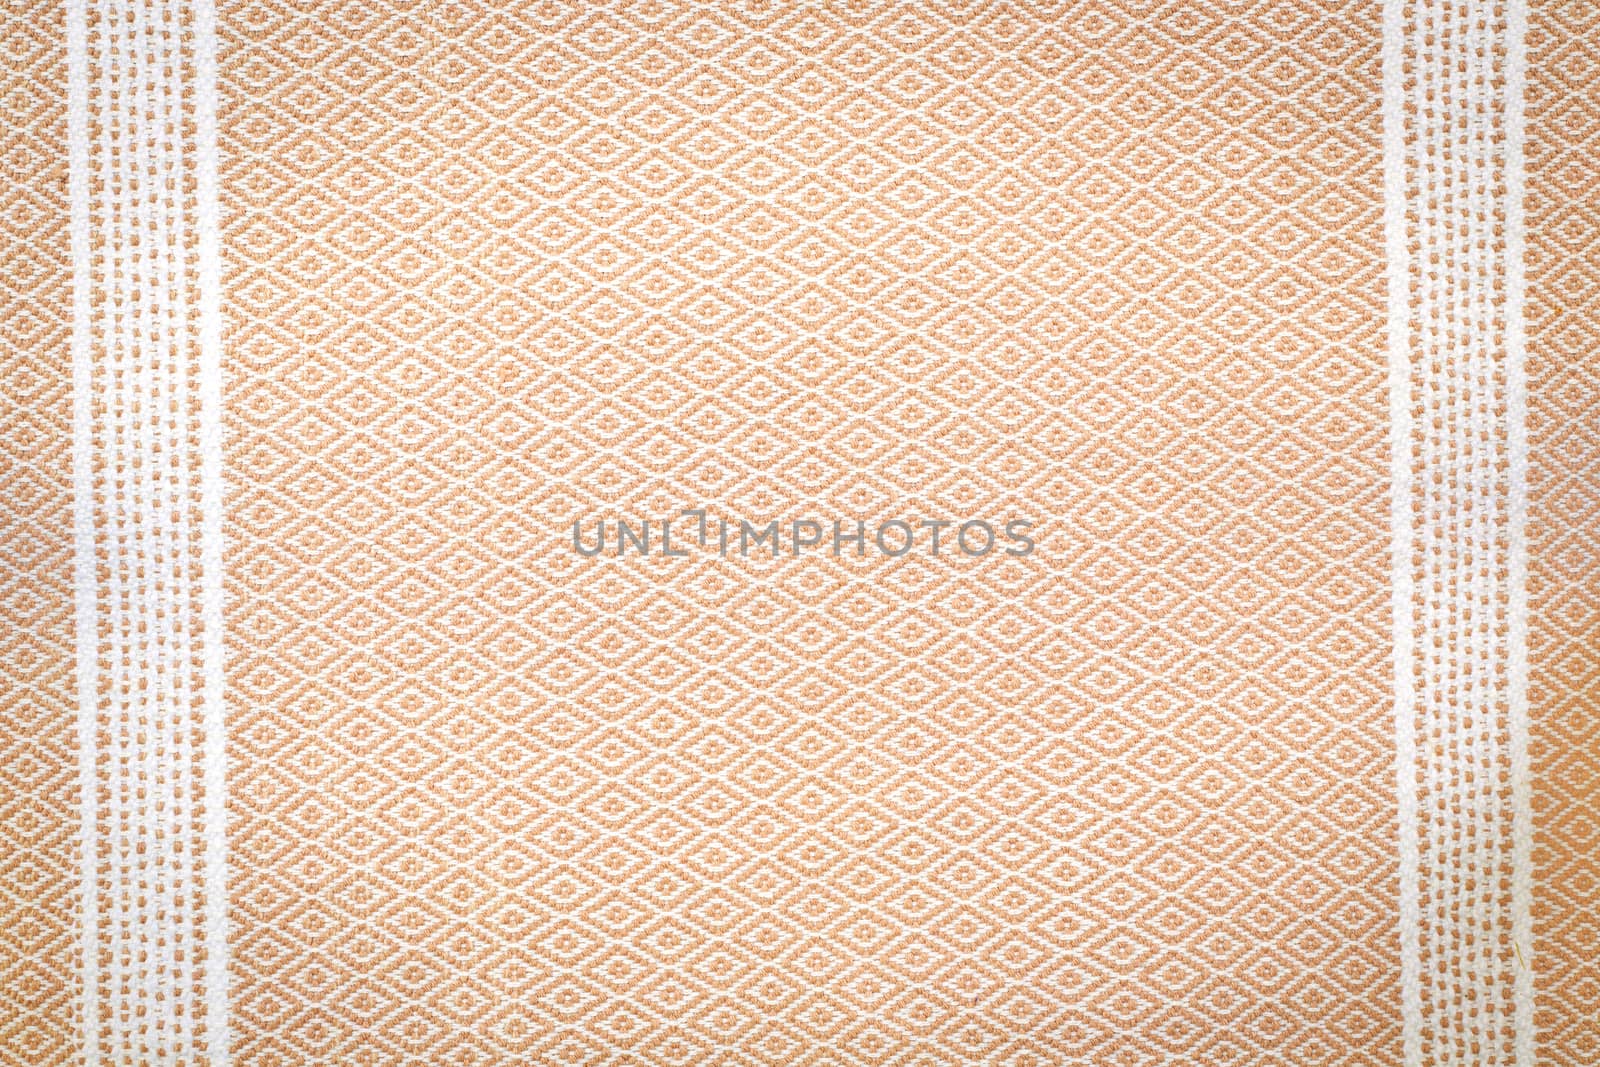 Brown lace fabric silk background texture. by jayzynism